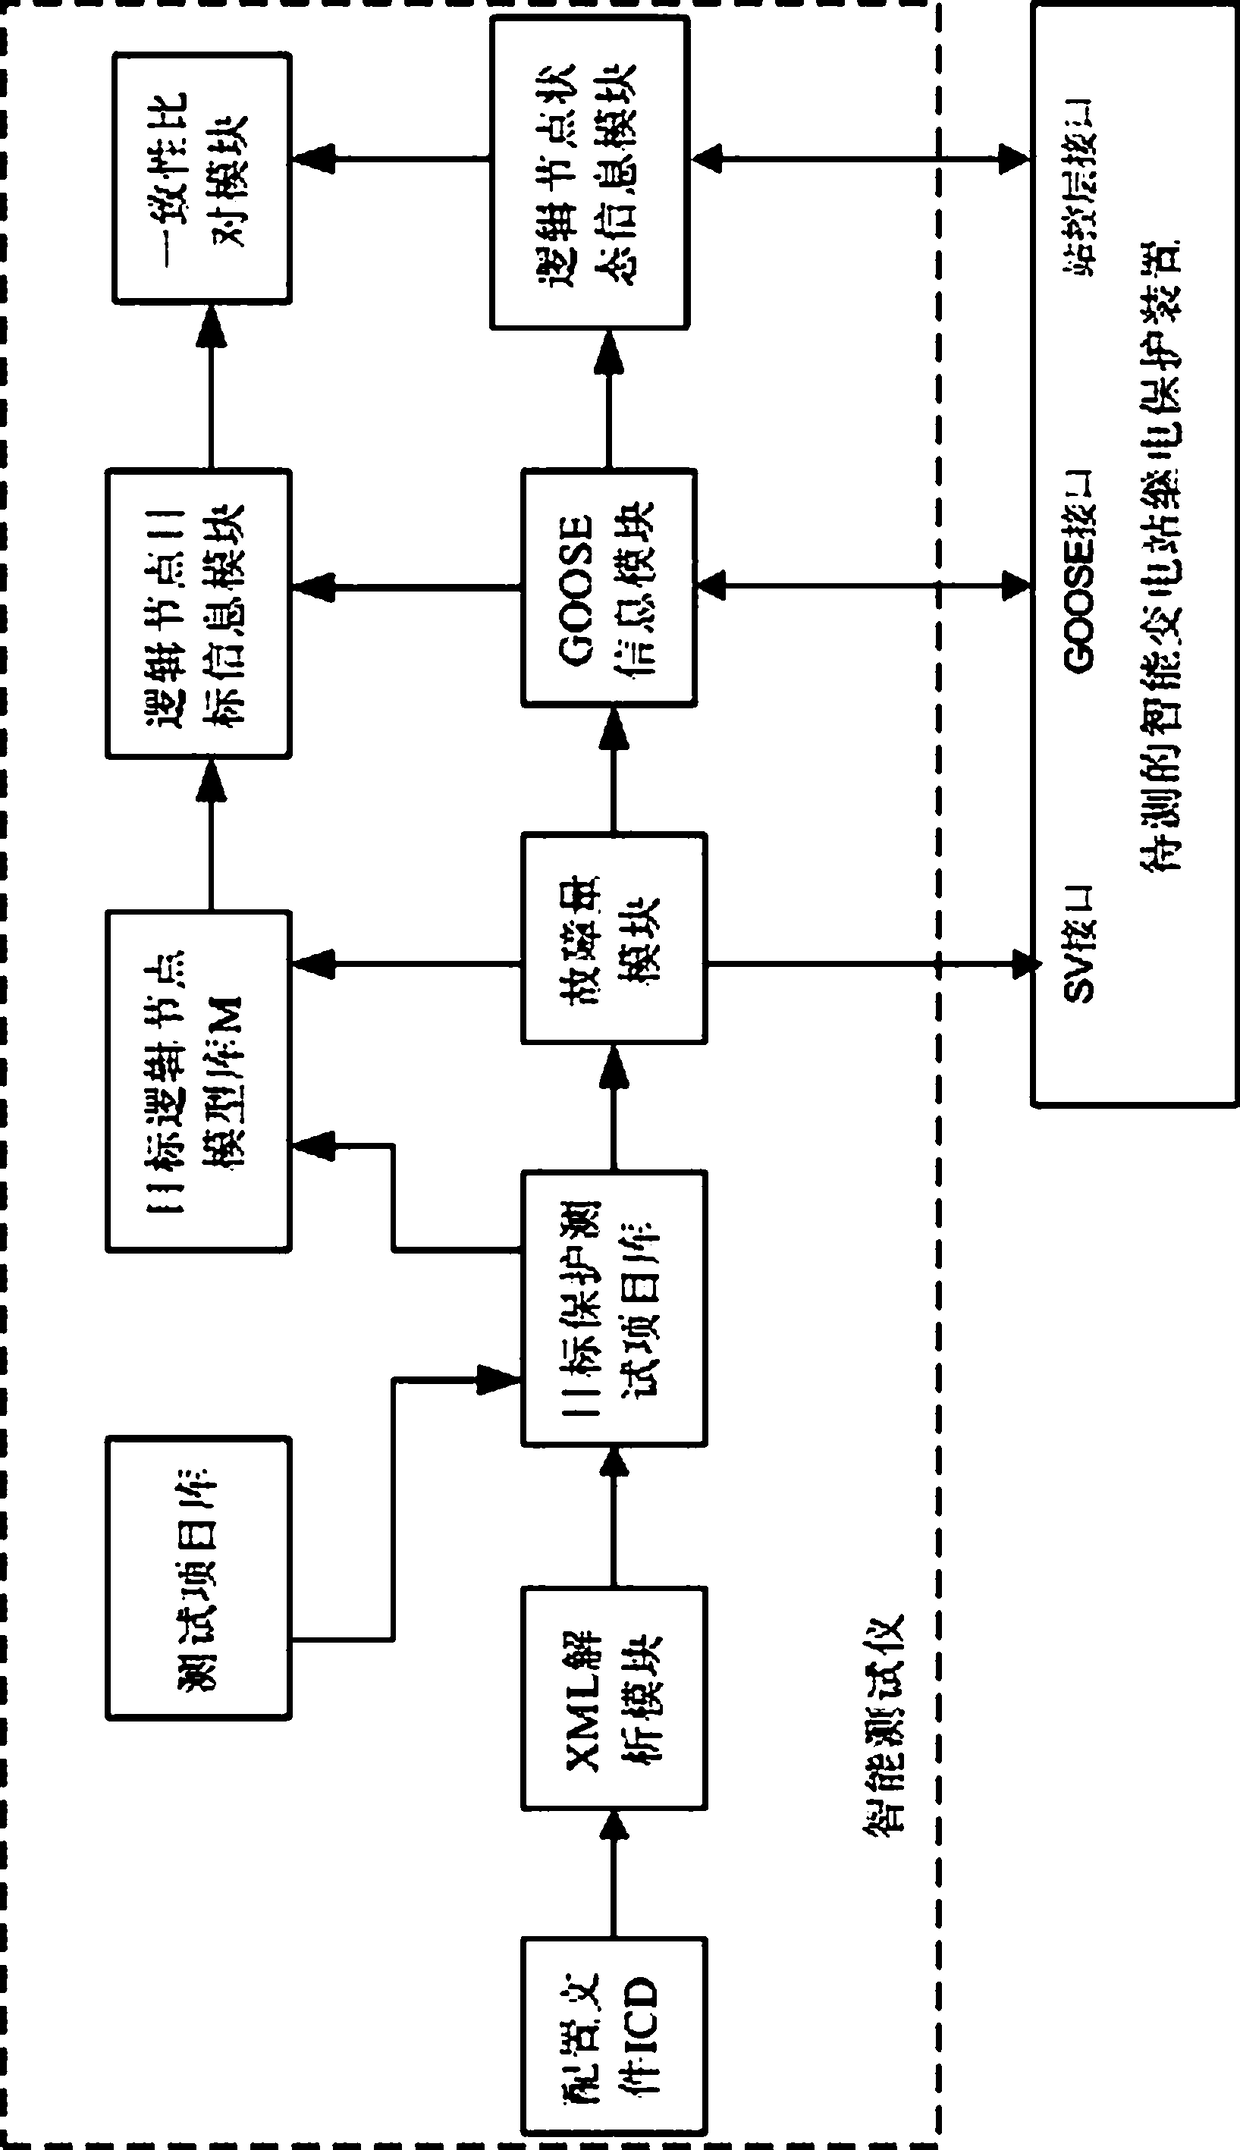 Automatic closed-loop test method for relay protection devices in smart substations